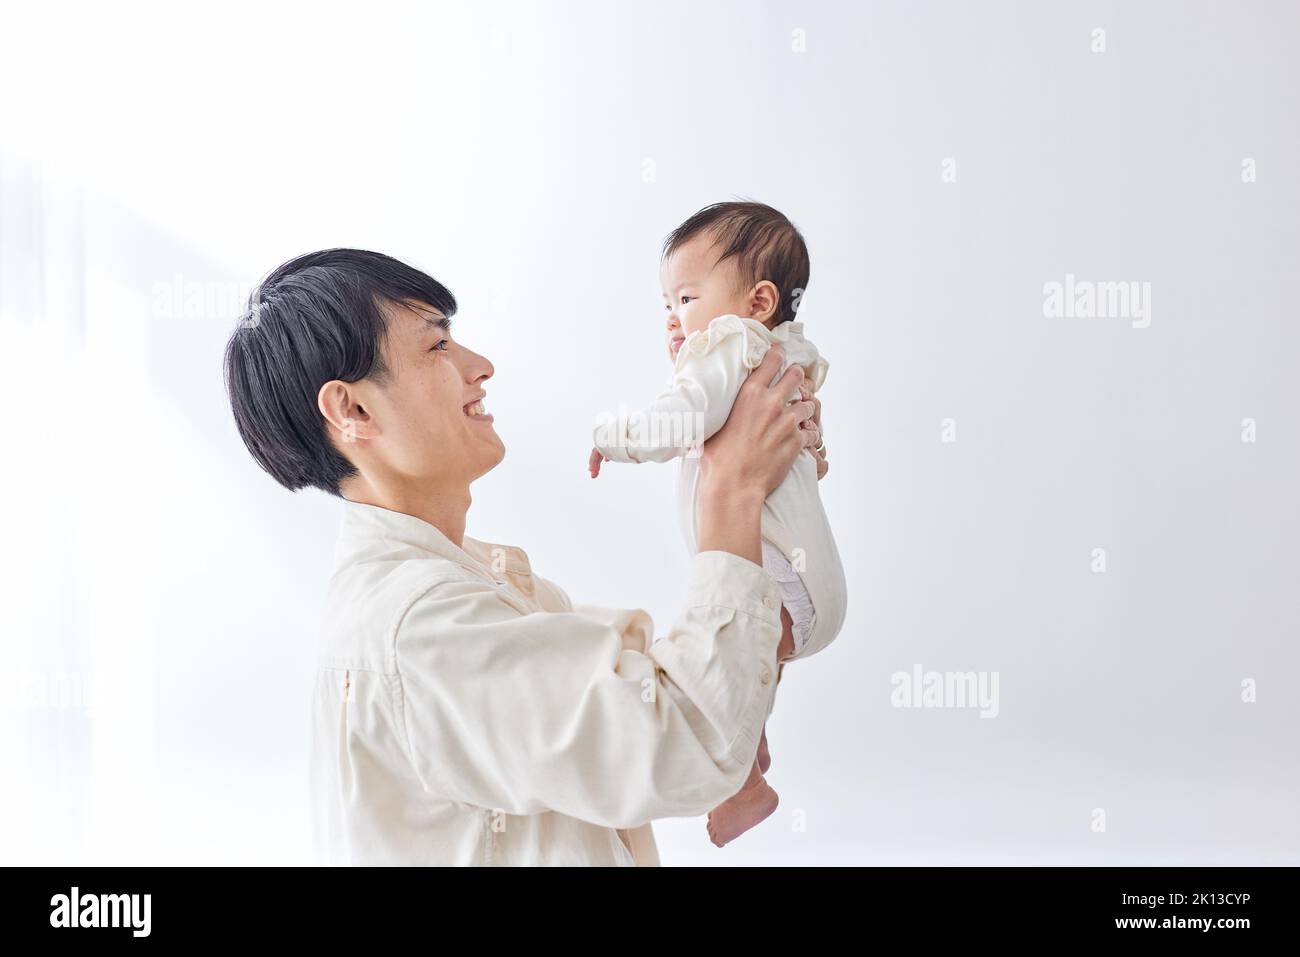 Japanese newborn with father Stock Photo